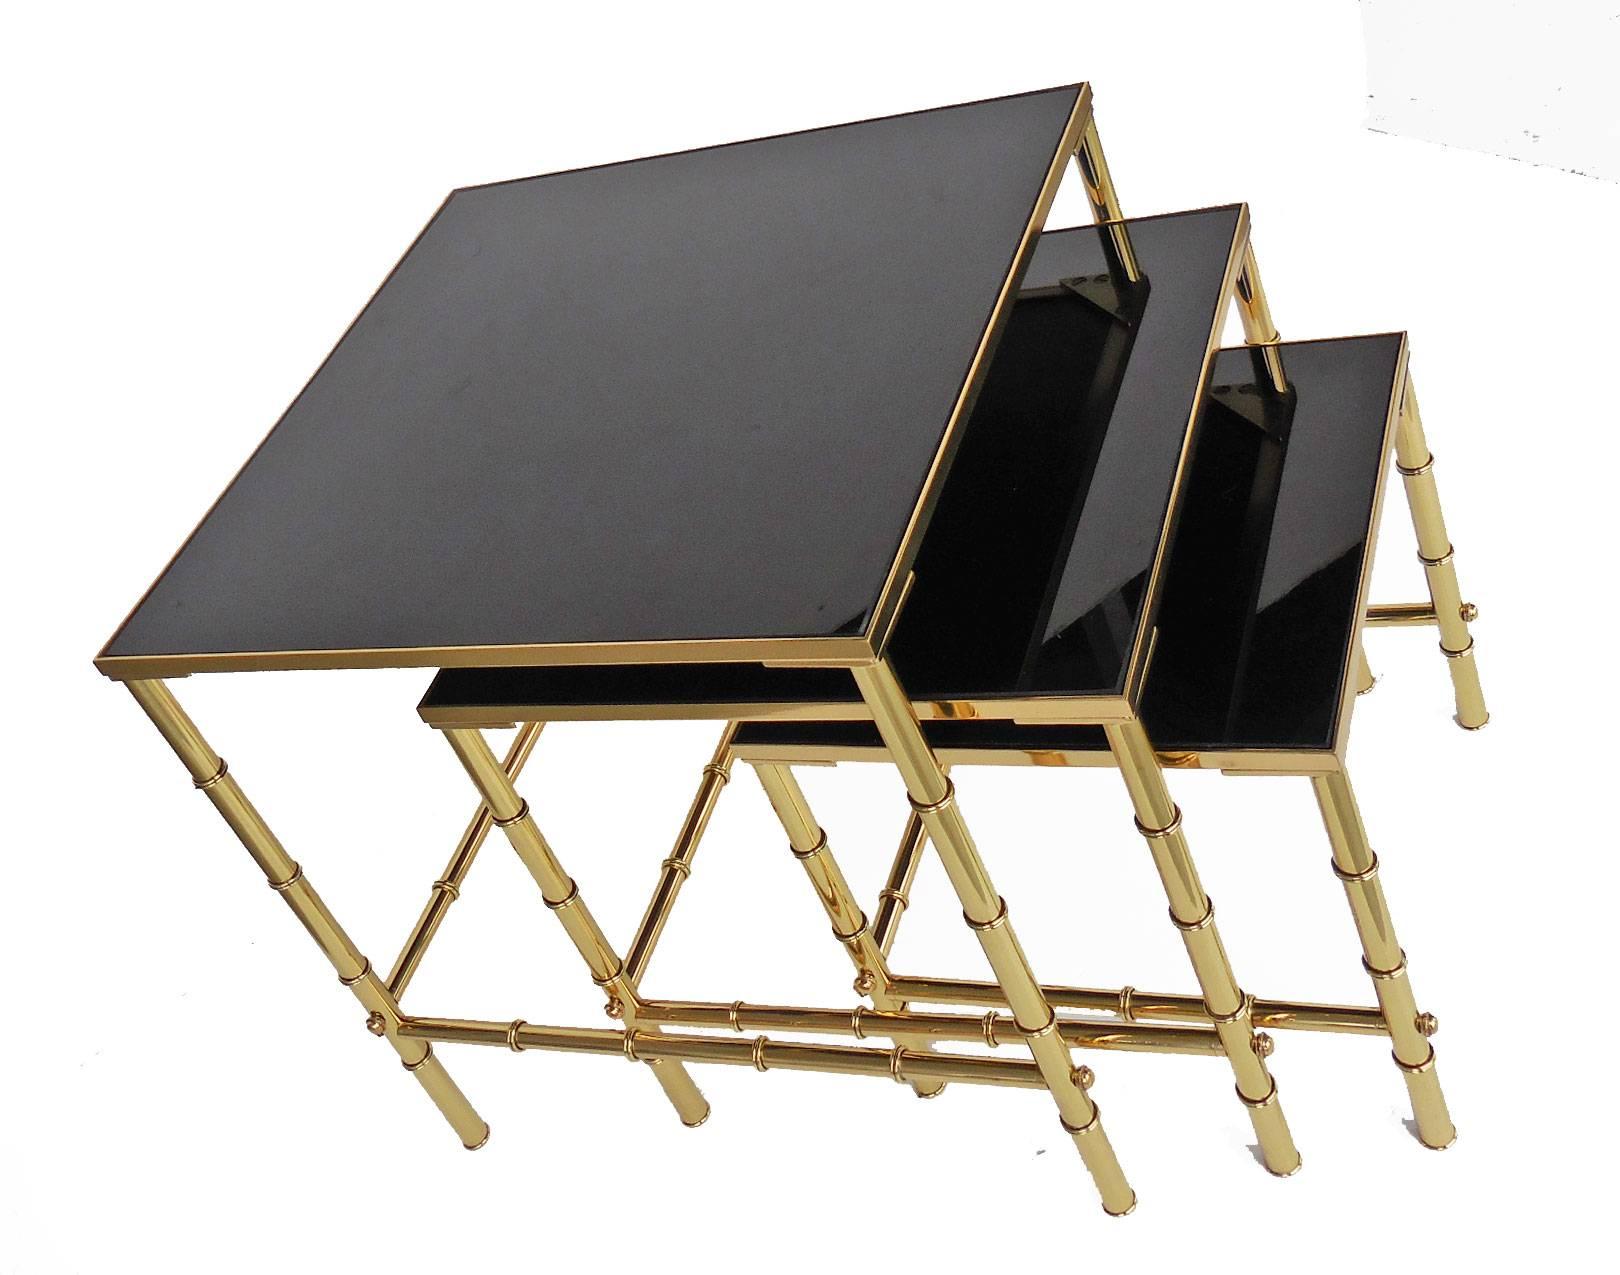 A beautiful set of solid brass nesting tables with black glass tops. Exquisite design and masterfully executed.